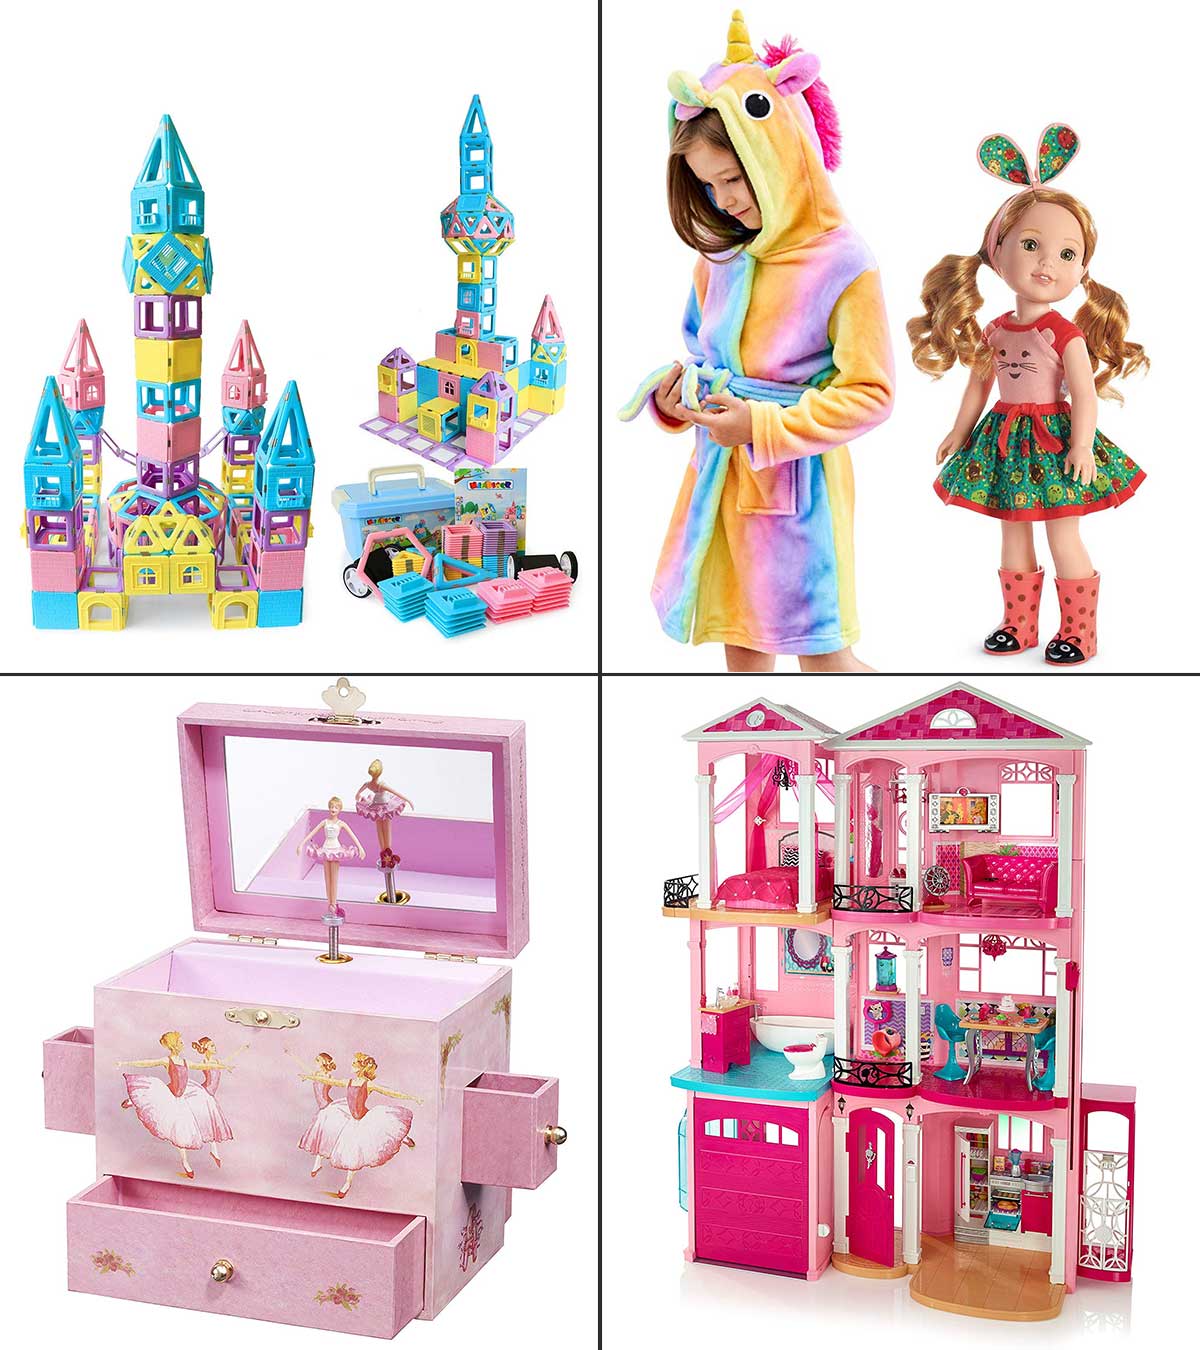 https://www.momjunction.com/wp-content/uploads/2016/02/31-Best-Gifts-For-5-Year-Old-Girls.jpg